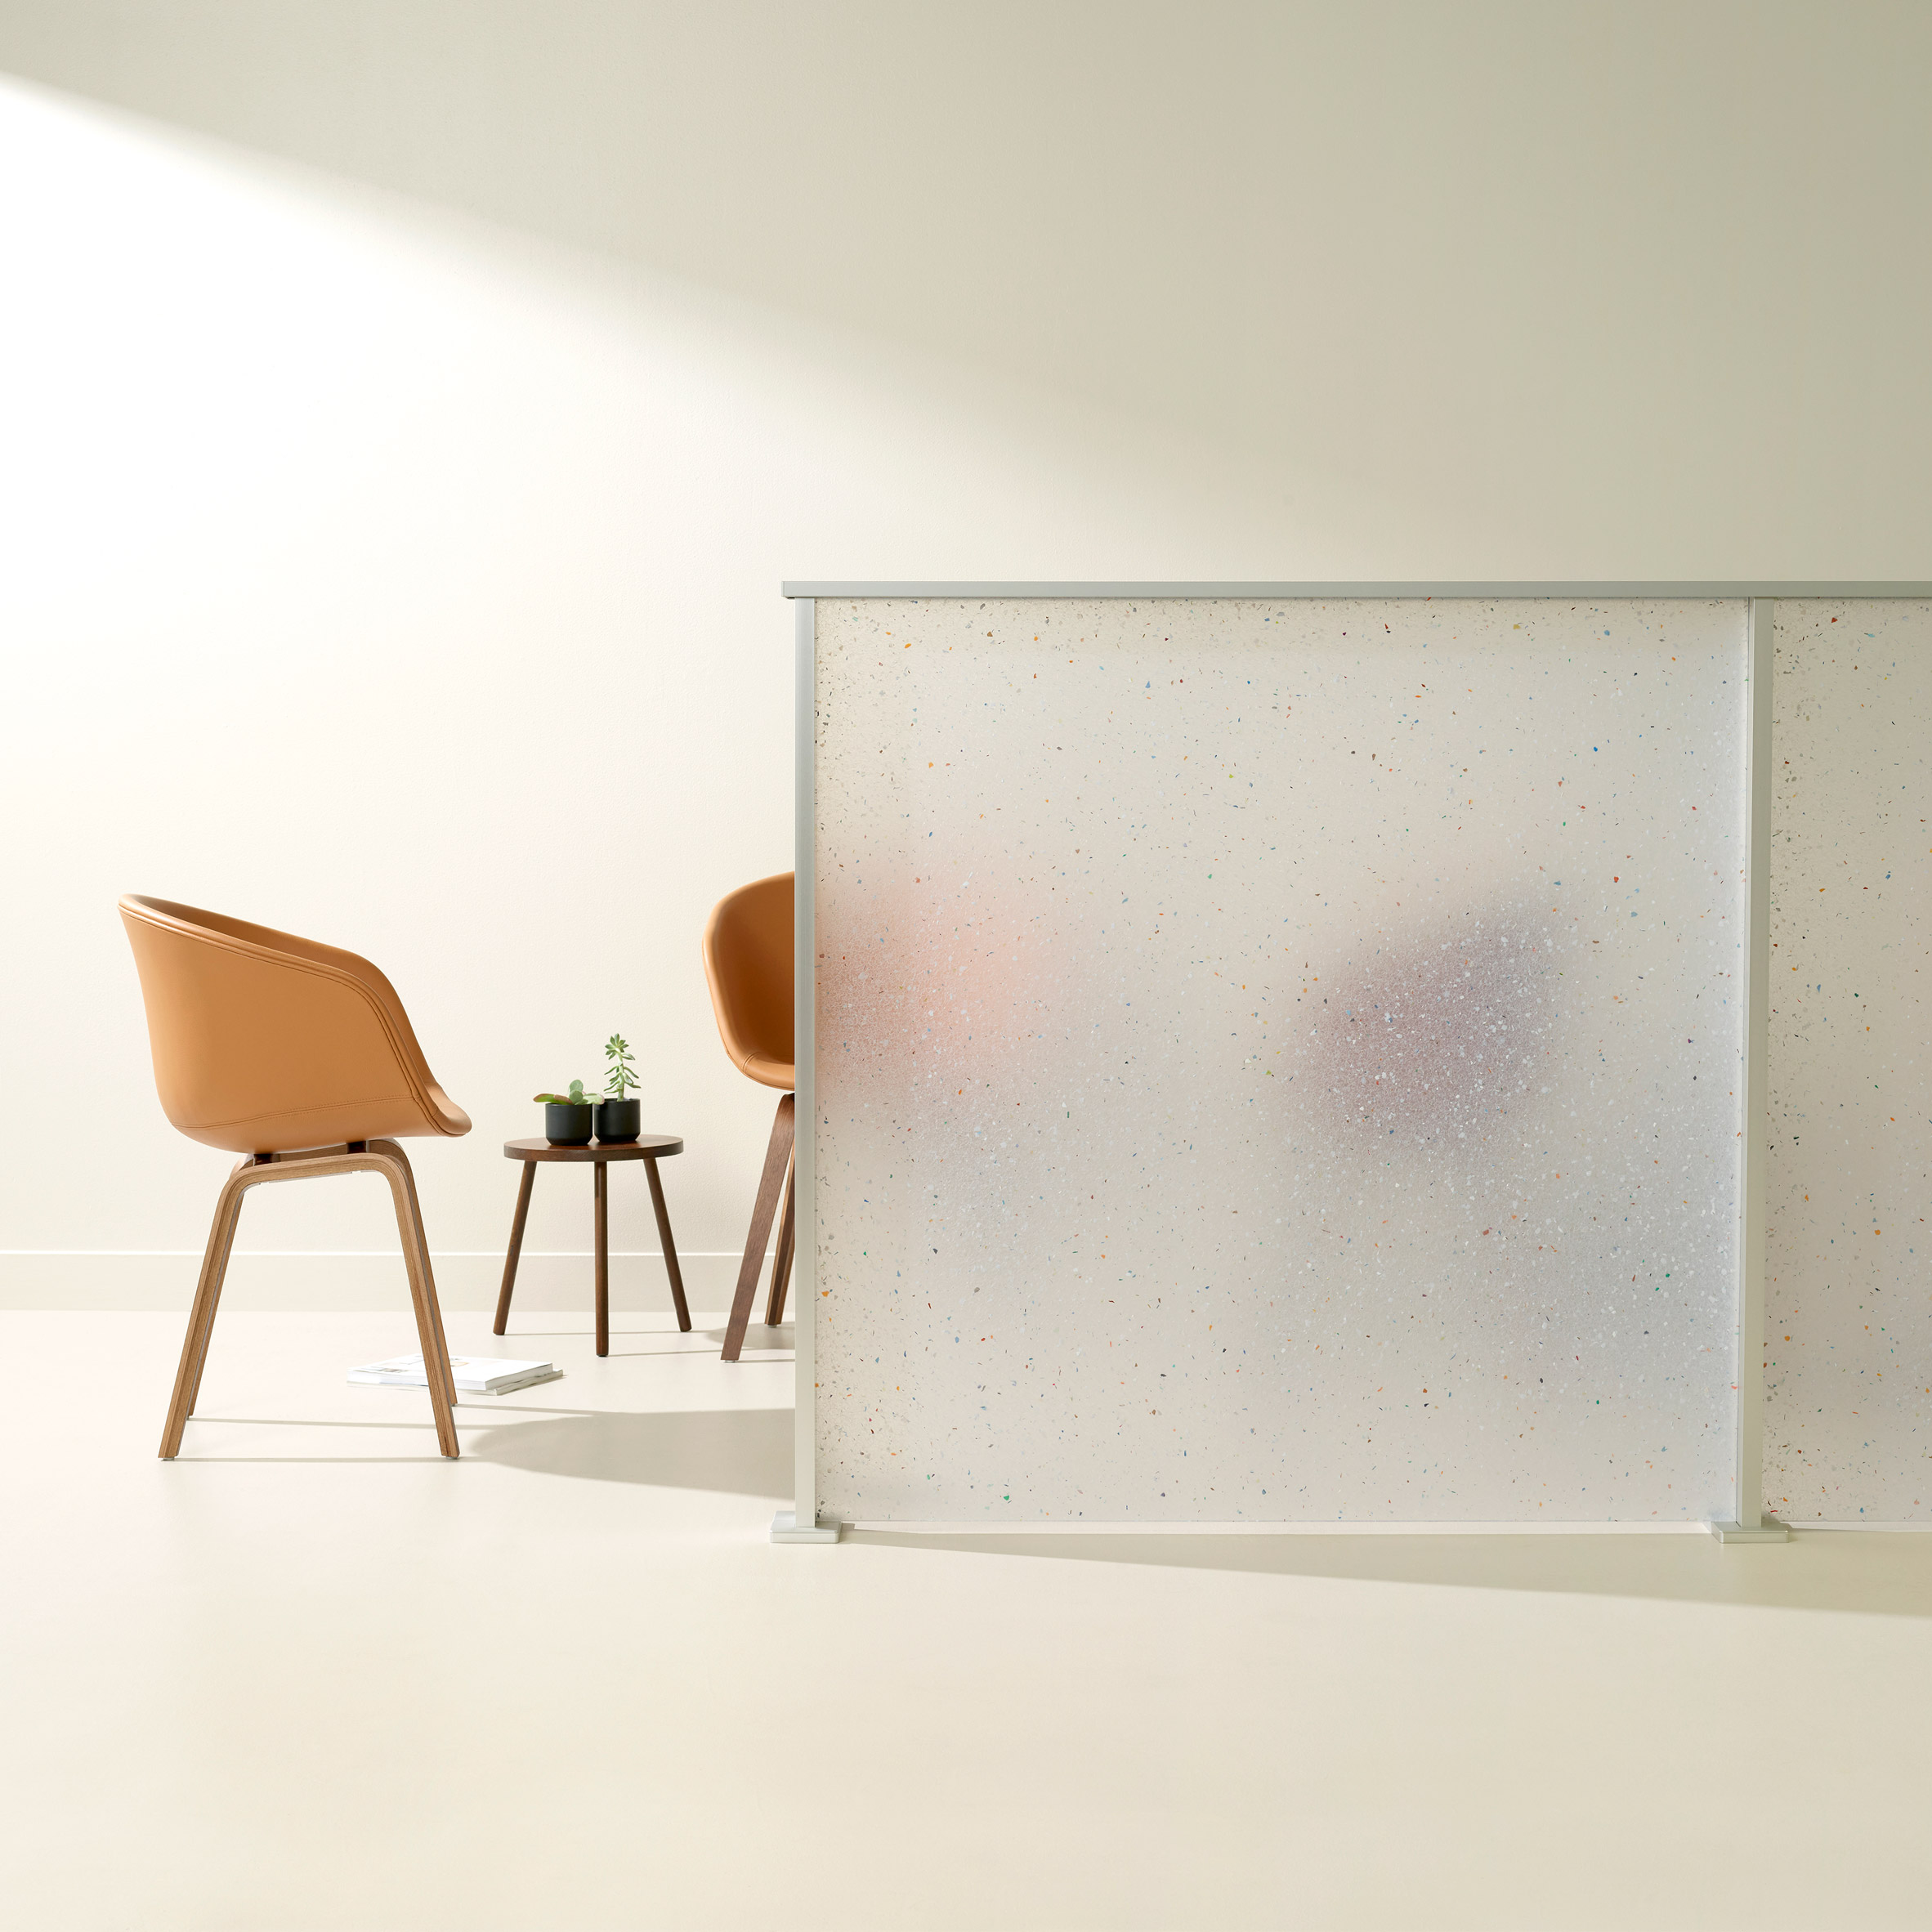 Flek Pure by 3form used as a partition wall with chairs behind